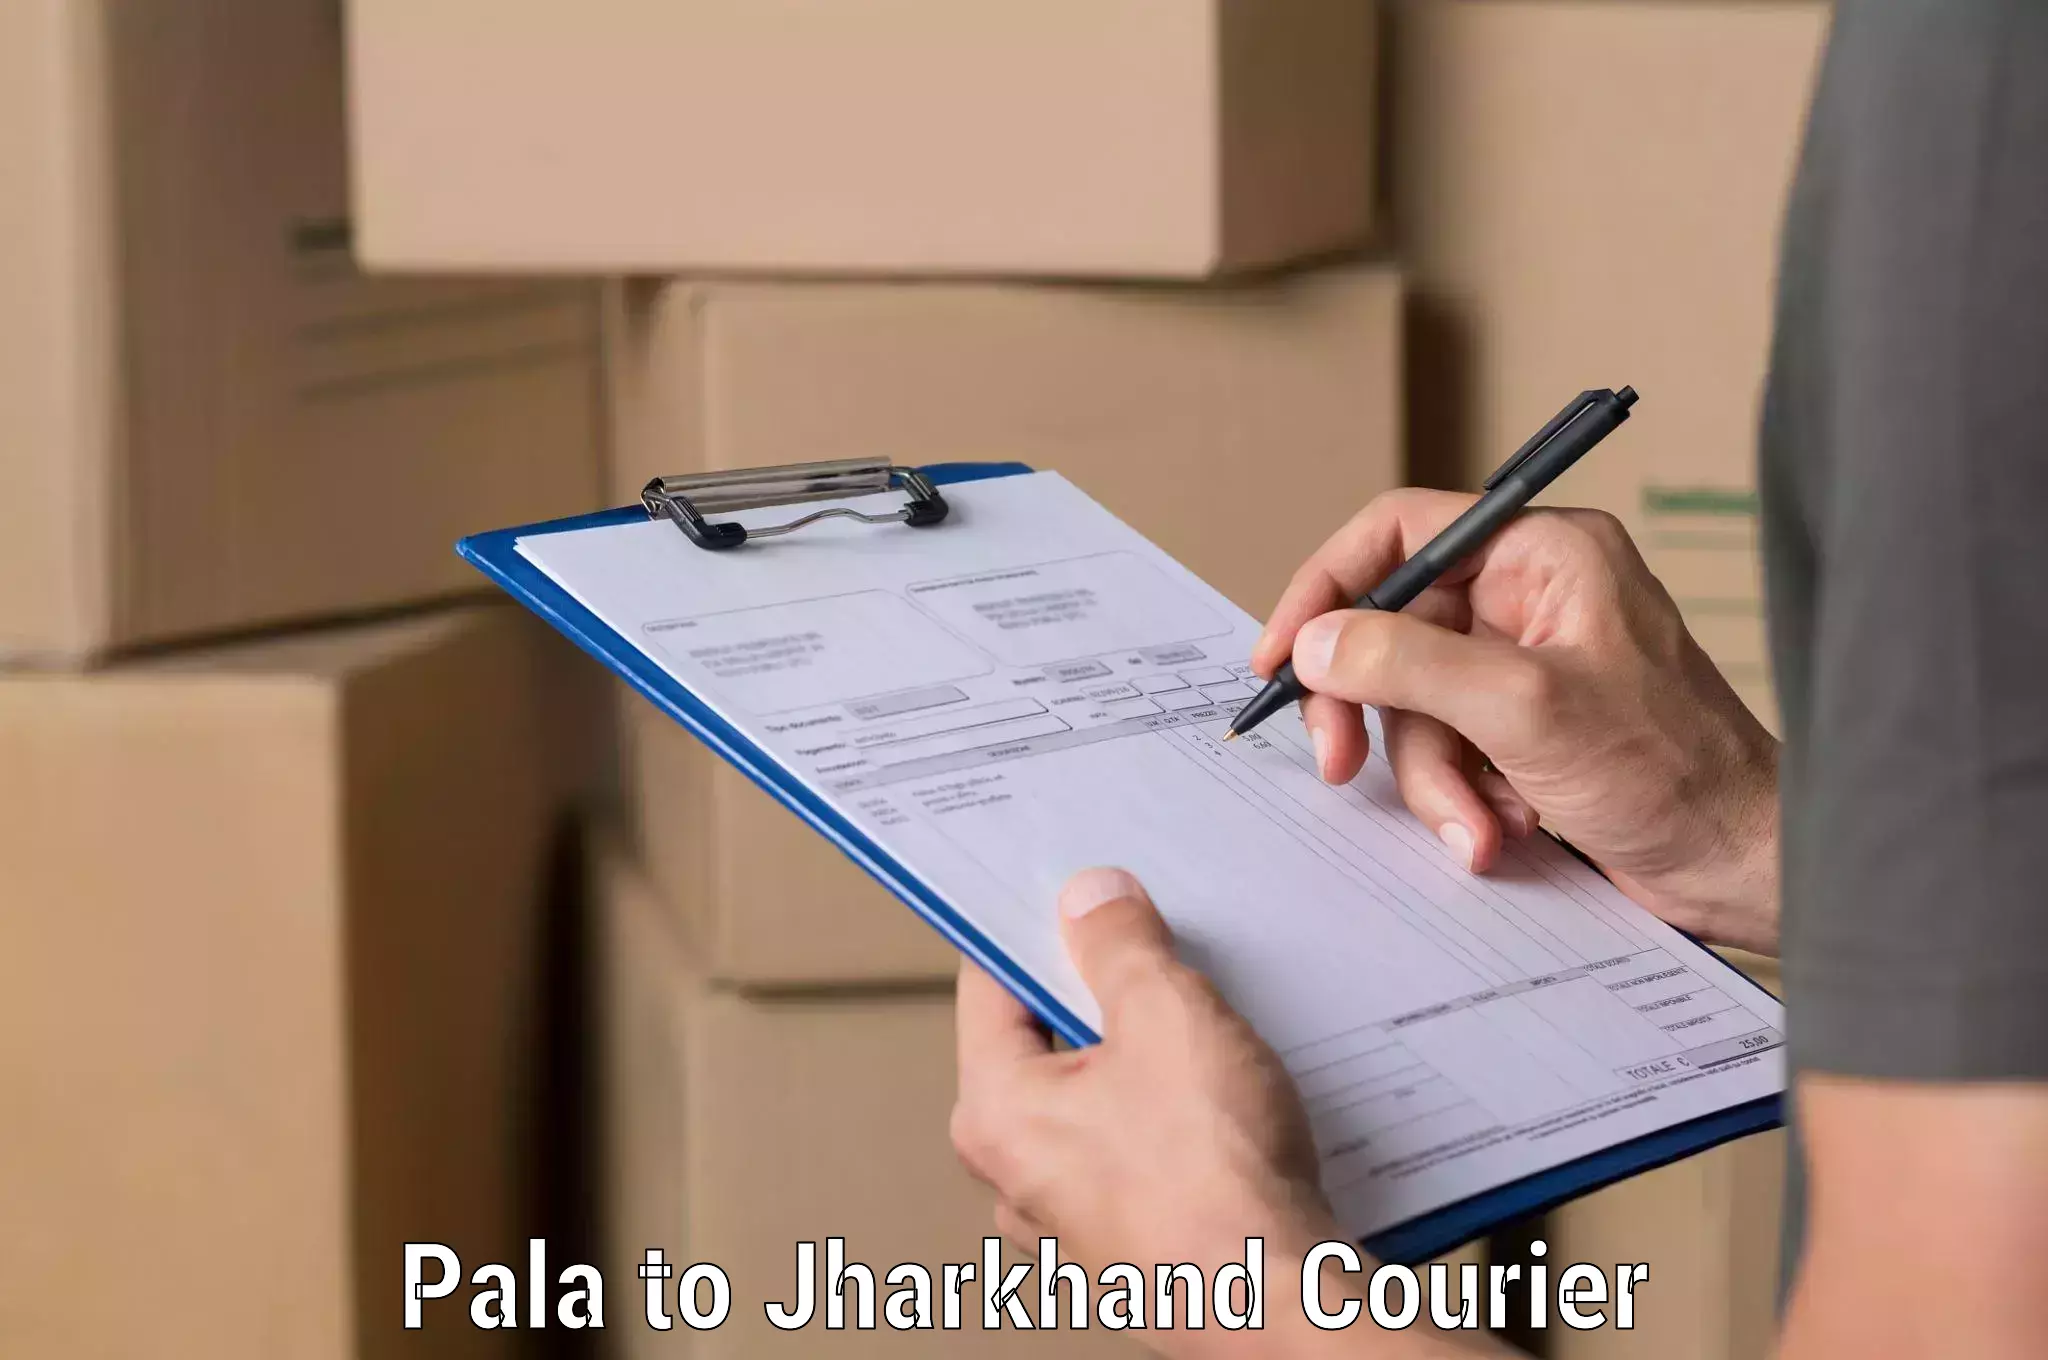 Reliable delivery network Pala to Jharkhand